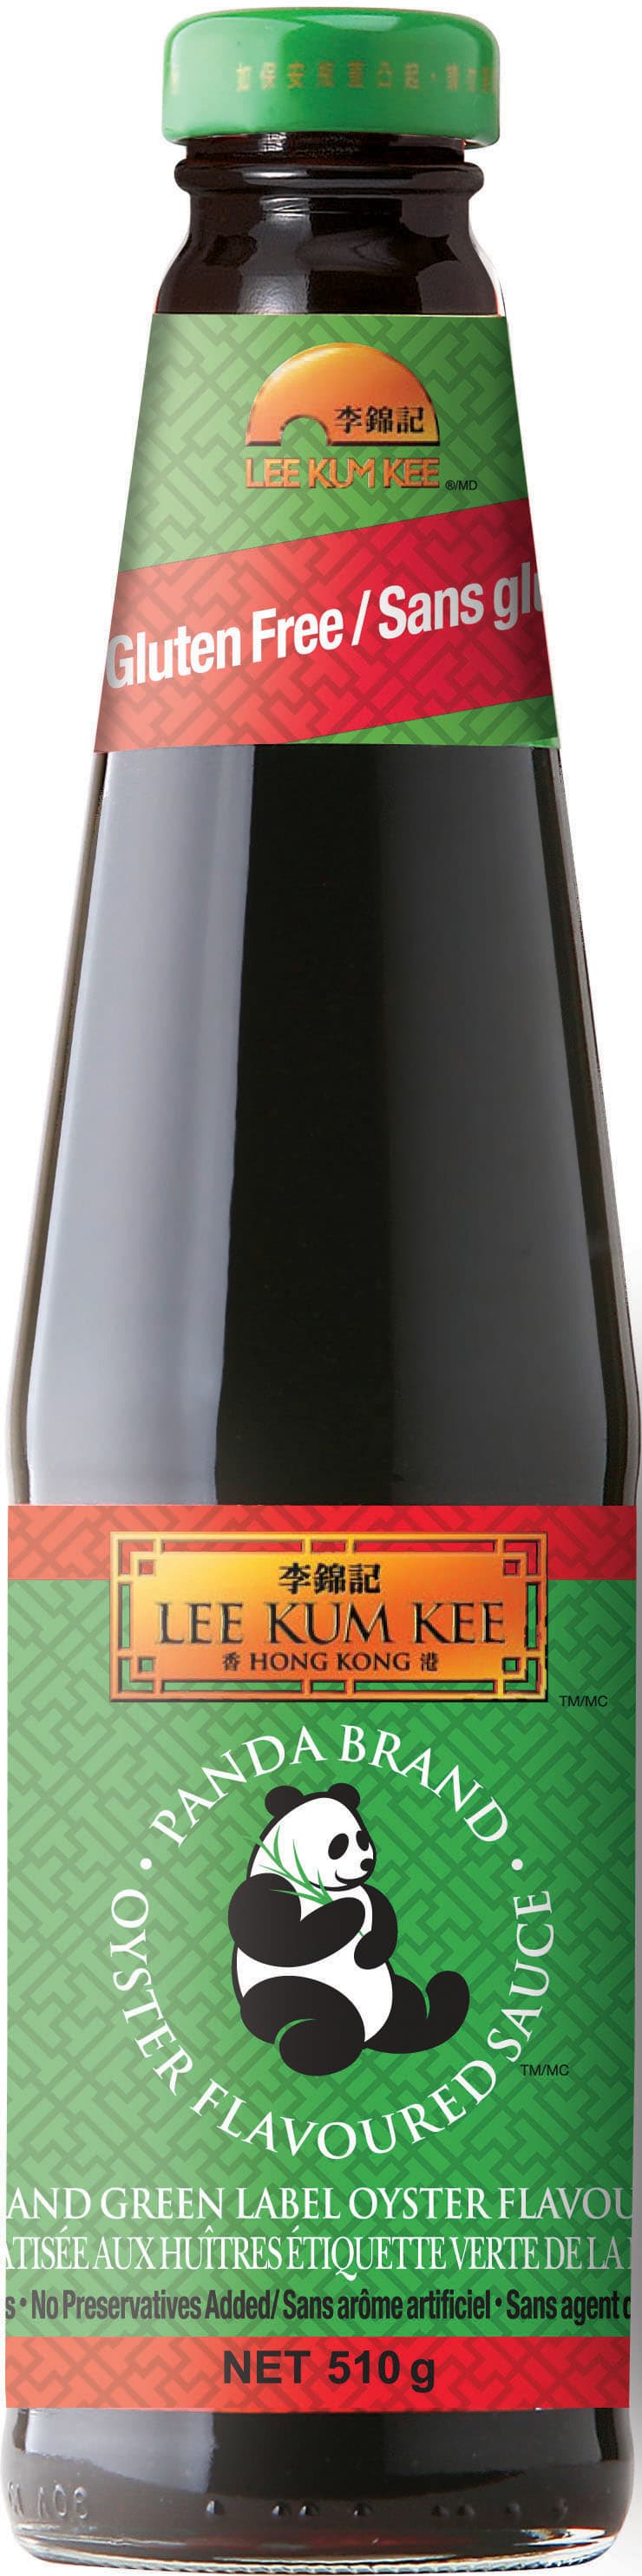 Panda Brand Green Label Oyster Flavoured Sauce 510g 